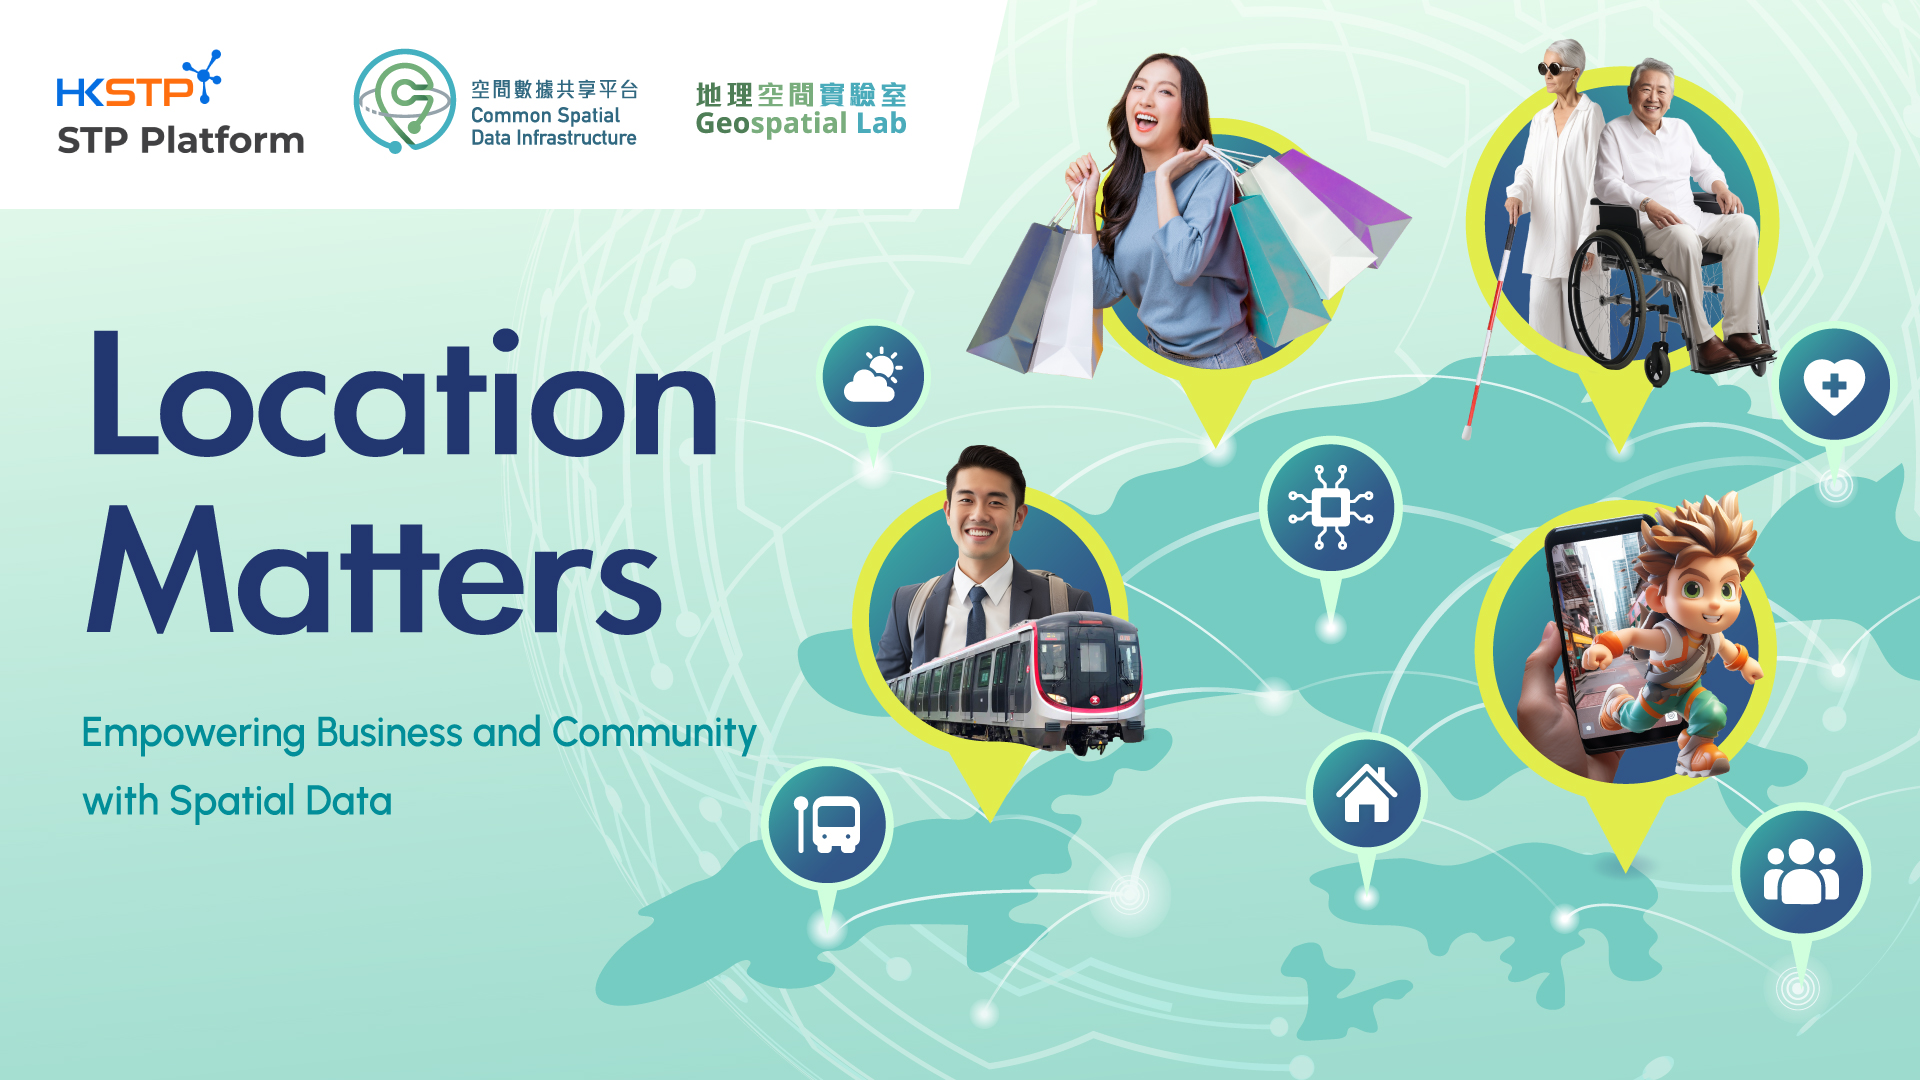 Location Matters: Empowering Business and Community with Spatial Data 海報